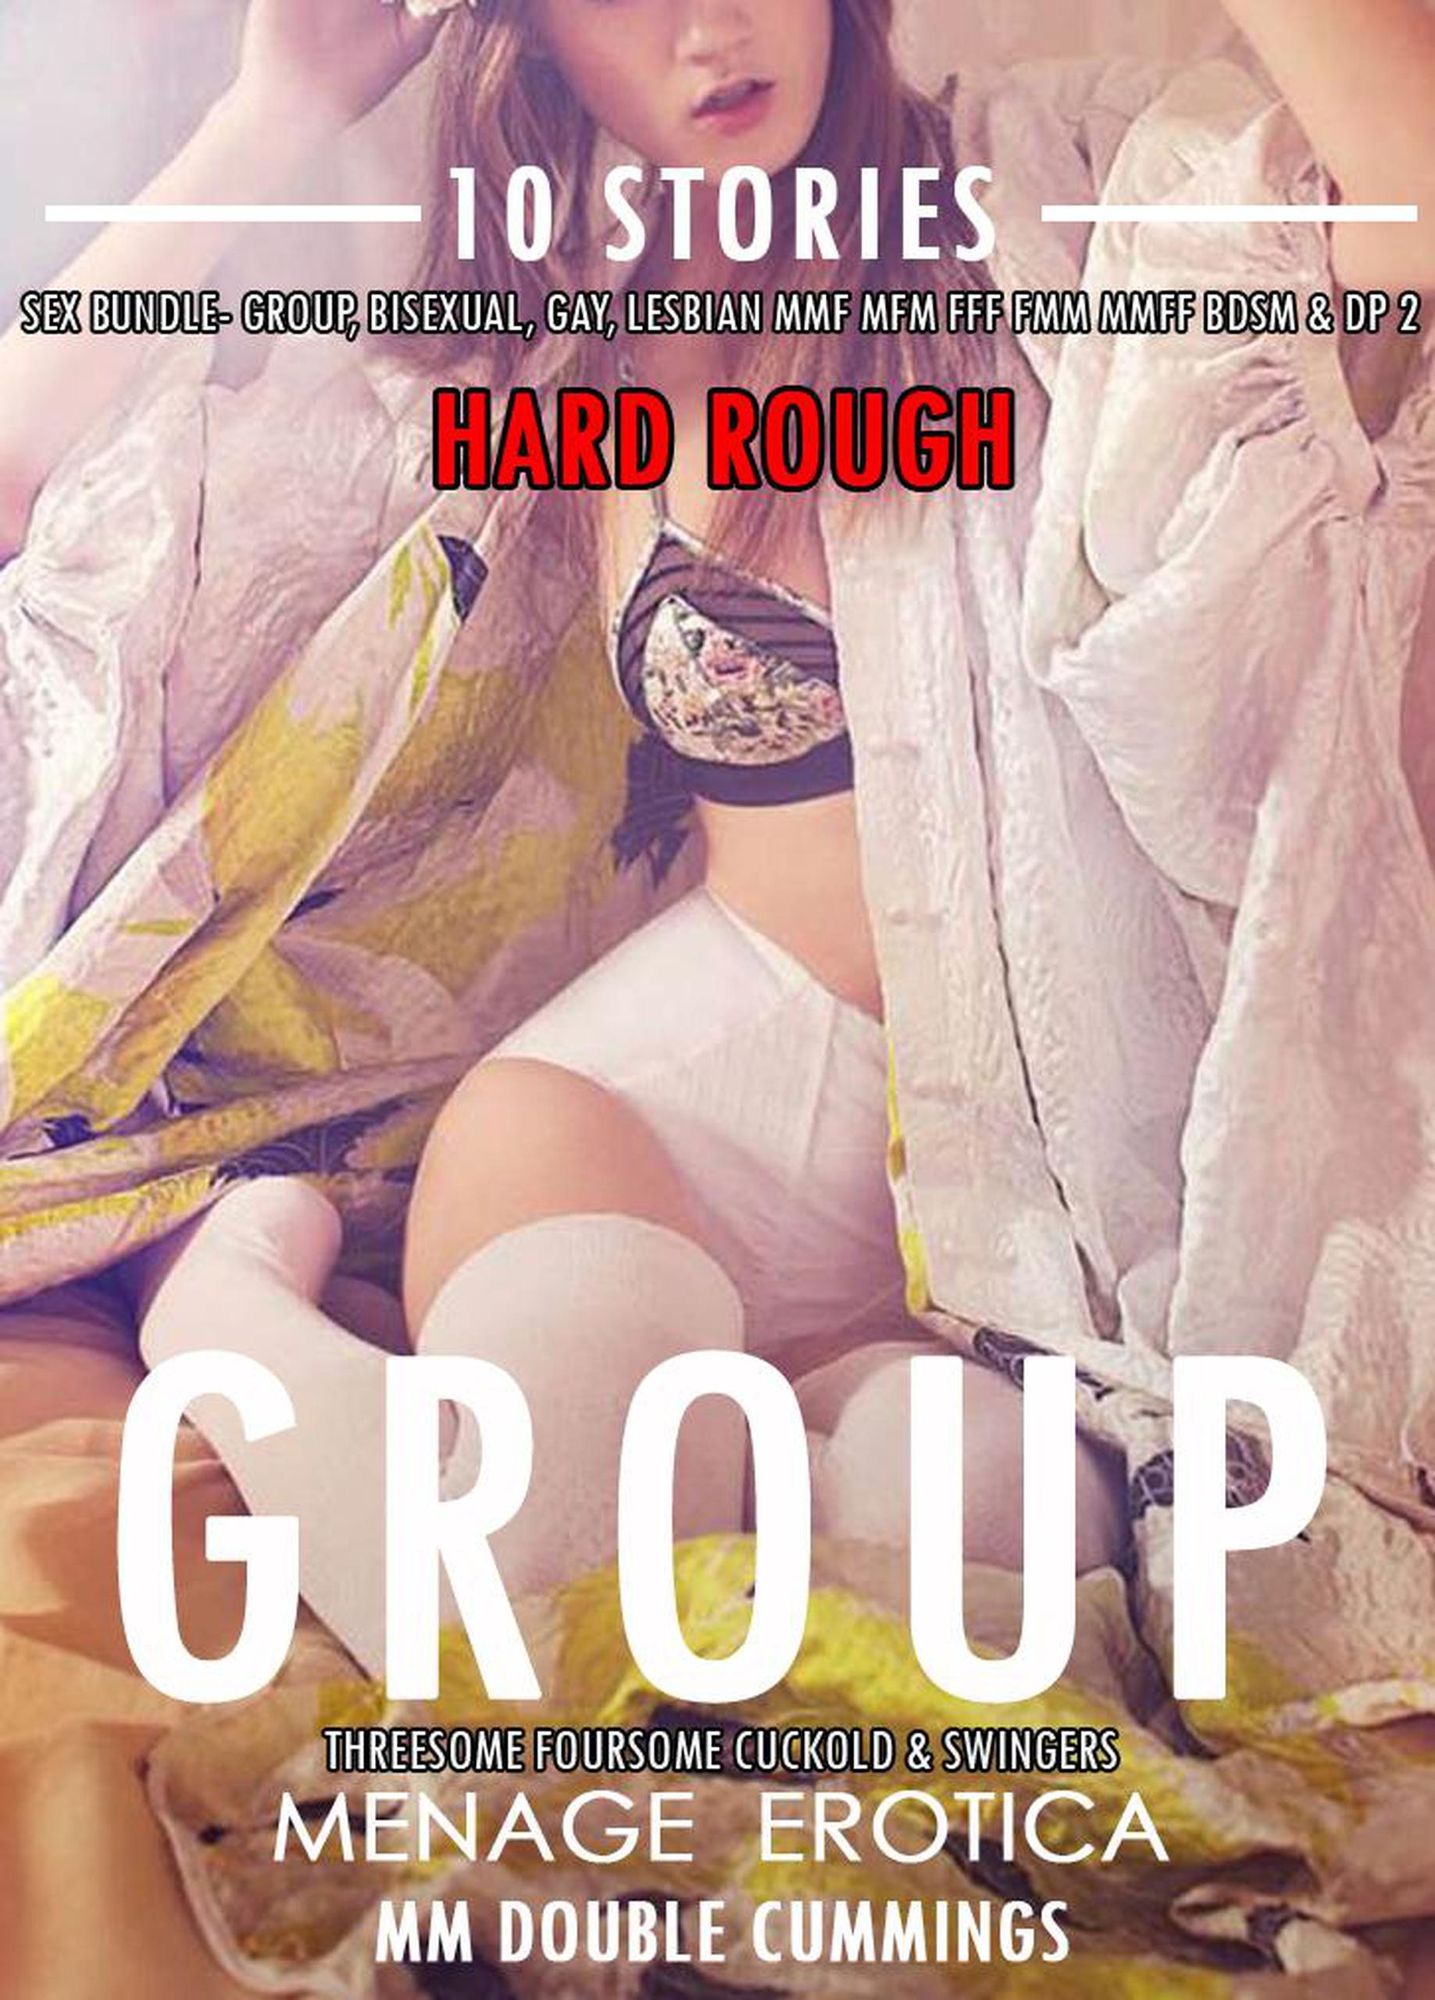 Hard Rough Menage Erotica Sex Bundle- Group, Bisexual, Gay, Lesbian MMF MFM FFF FMM MMFF BDSM and DP 2 (Threesome Foursome Cuckold and Swingers, #1) von MM Double Cummings